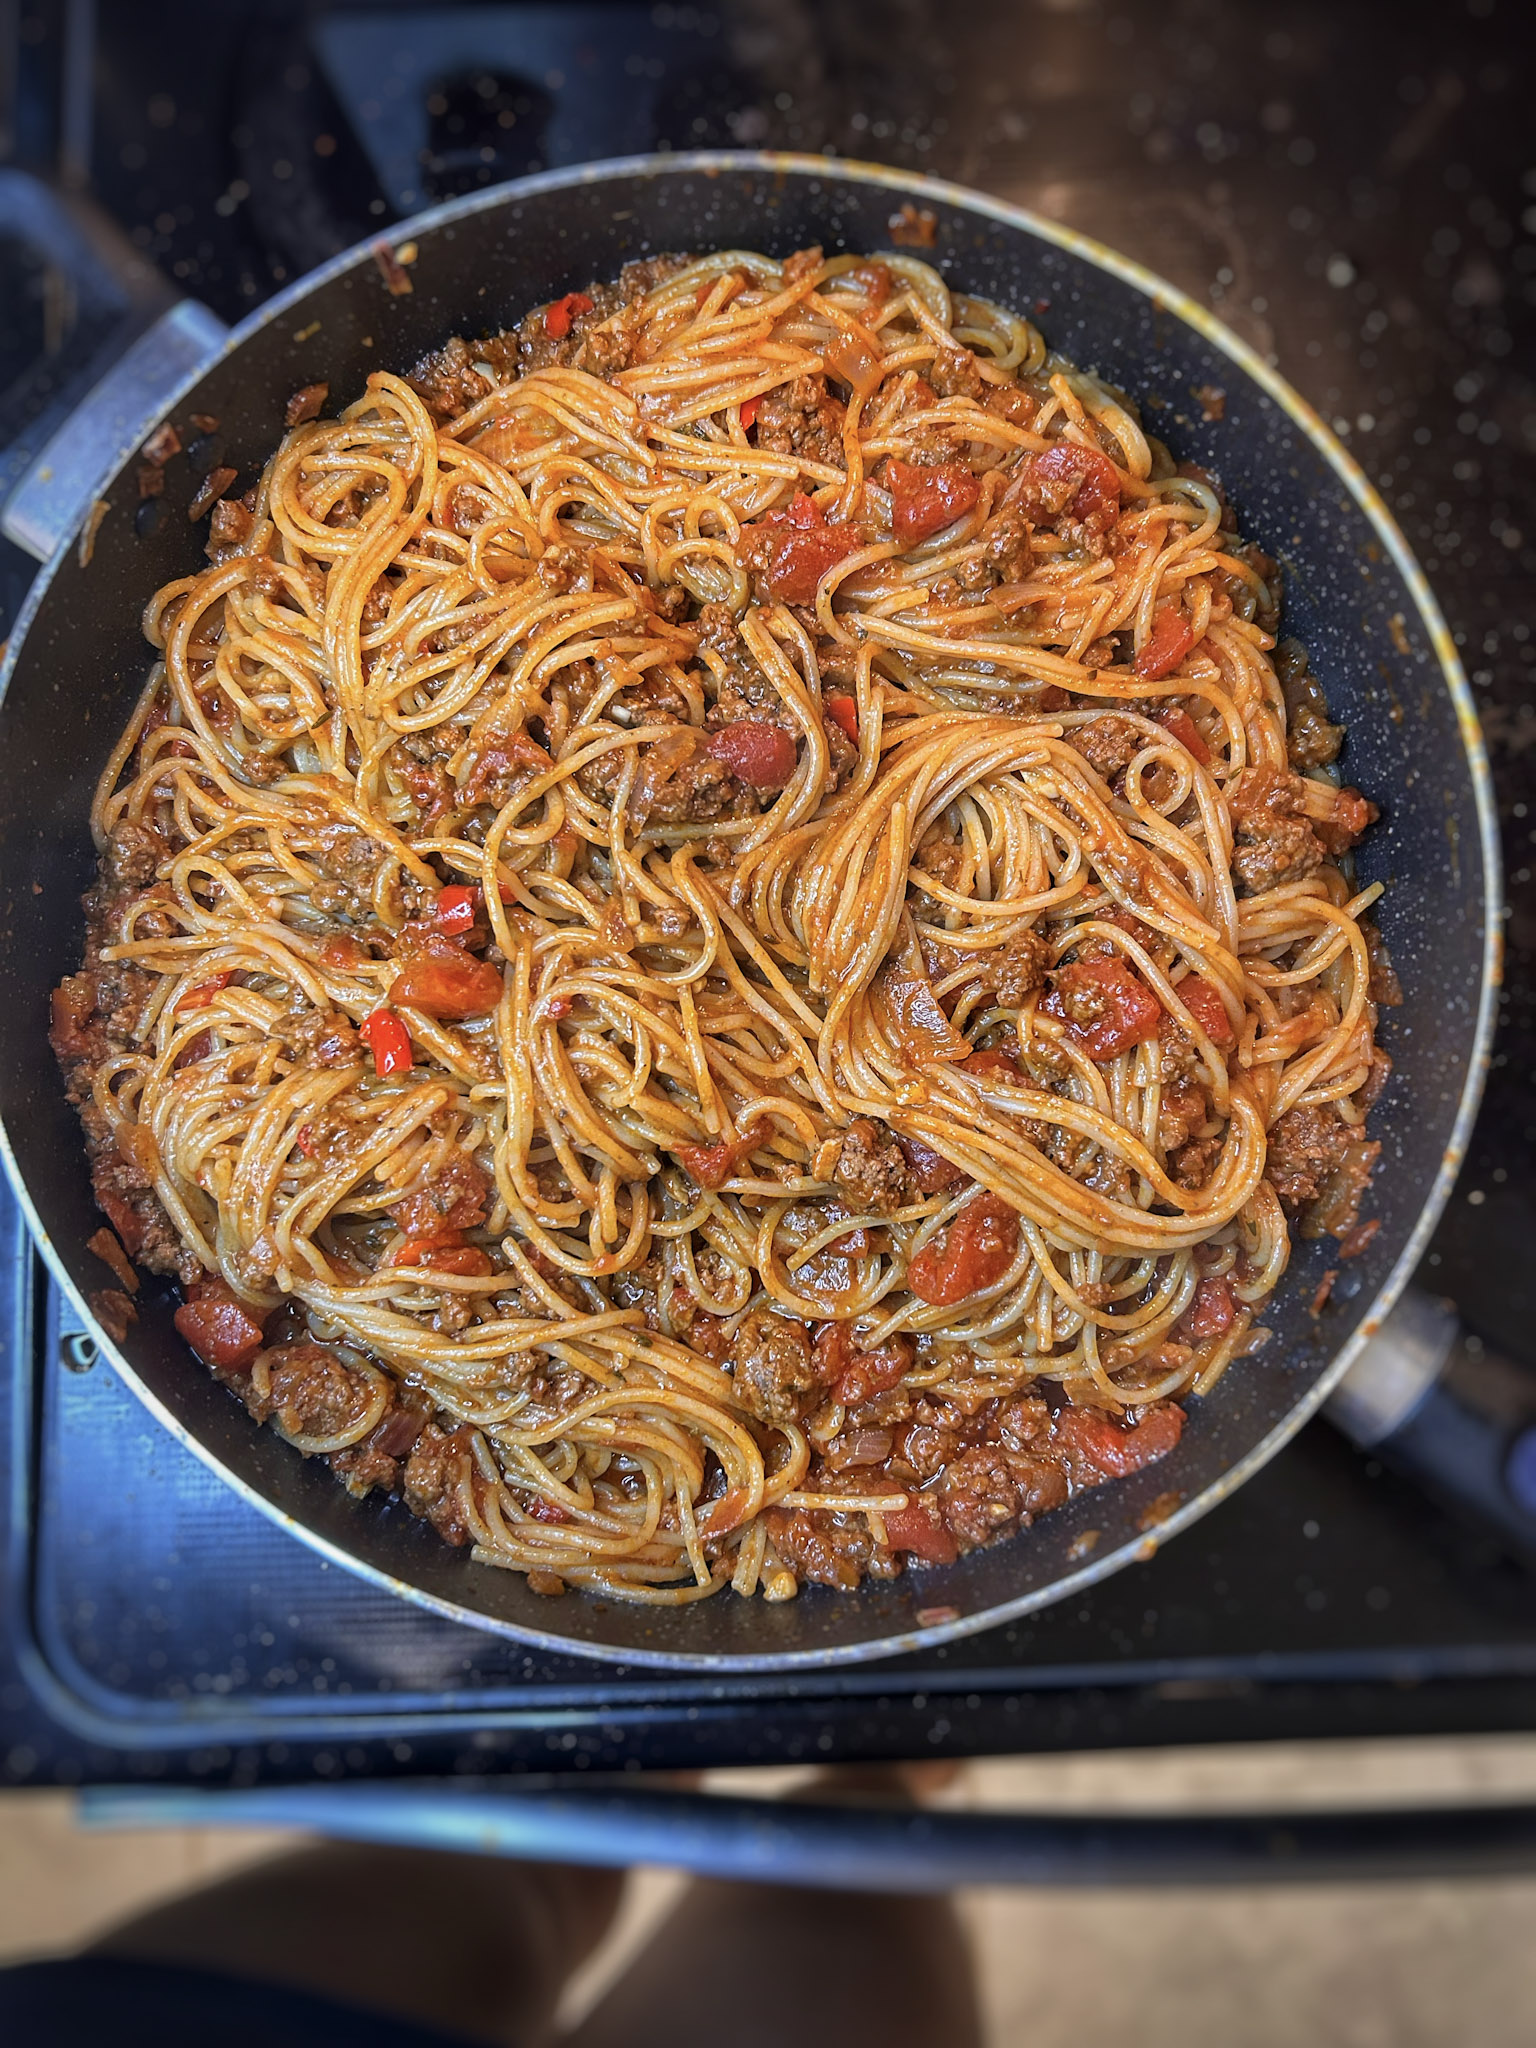 How to make the SIMPLEST spaghetti bolognese recipe at home